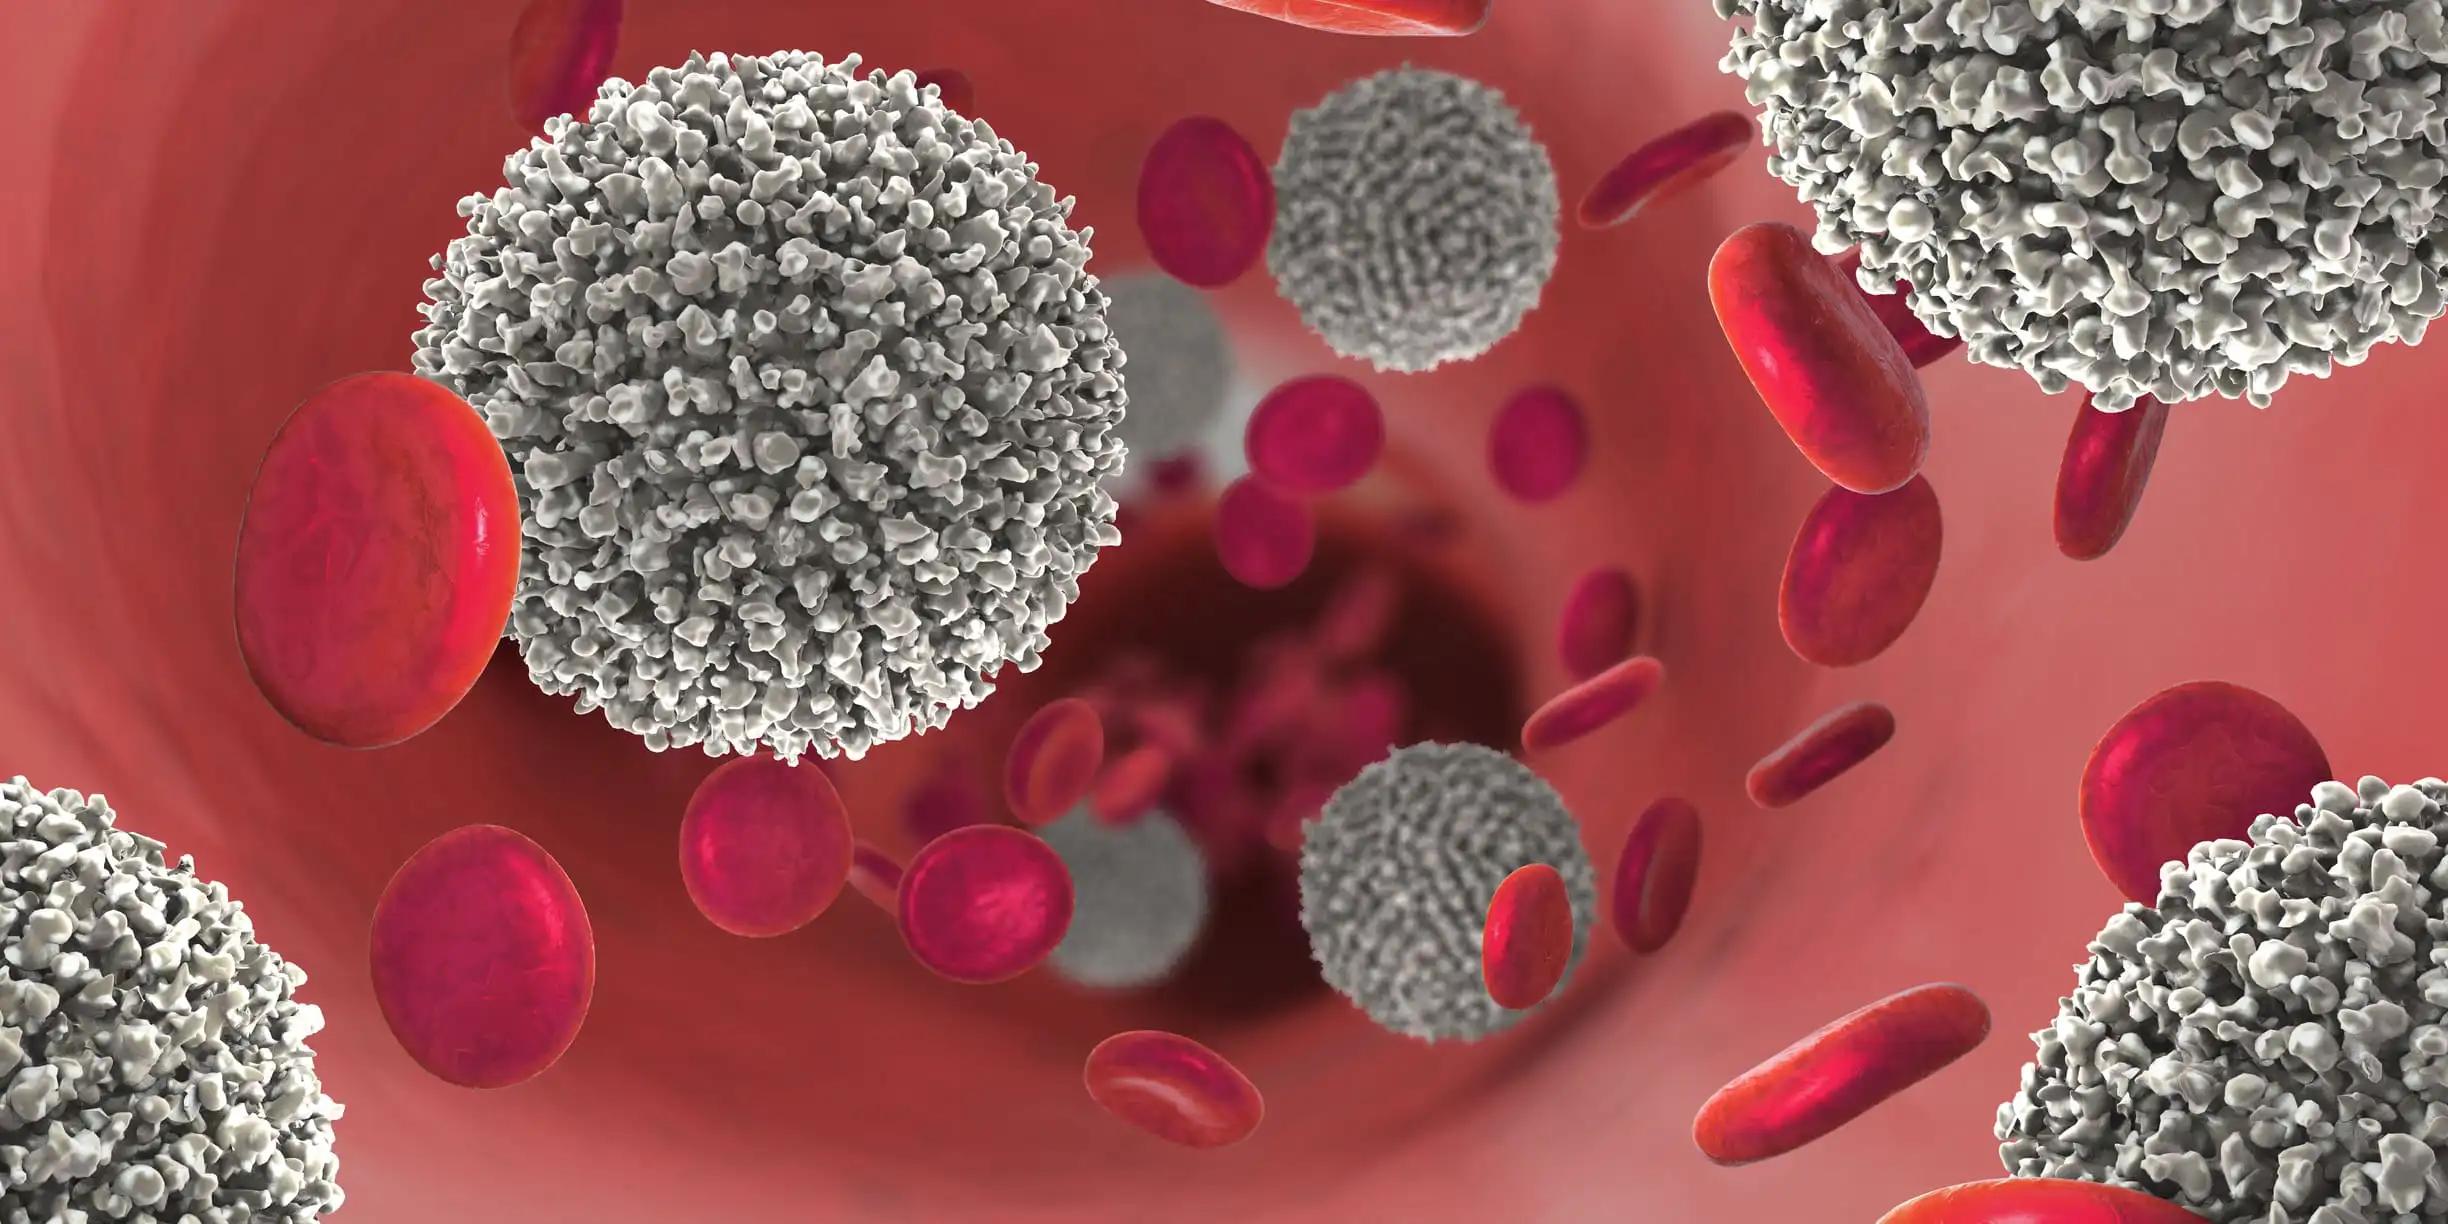 3D illustration of White blood cells and Immunotherapy lymphocyte cells